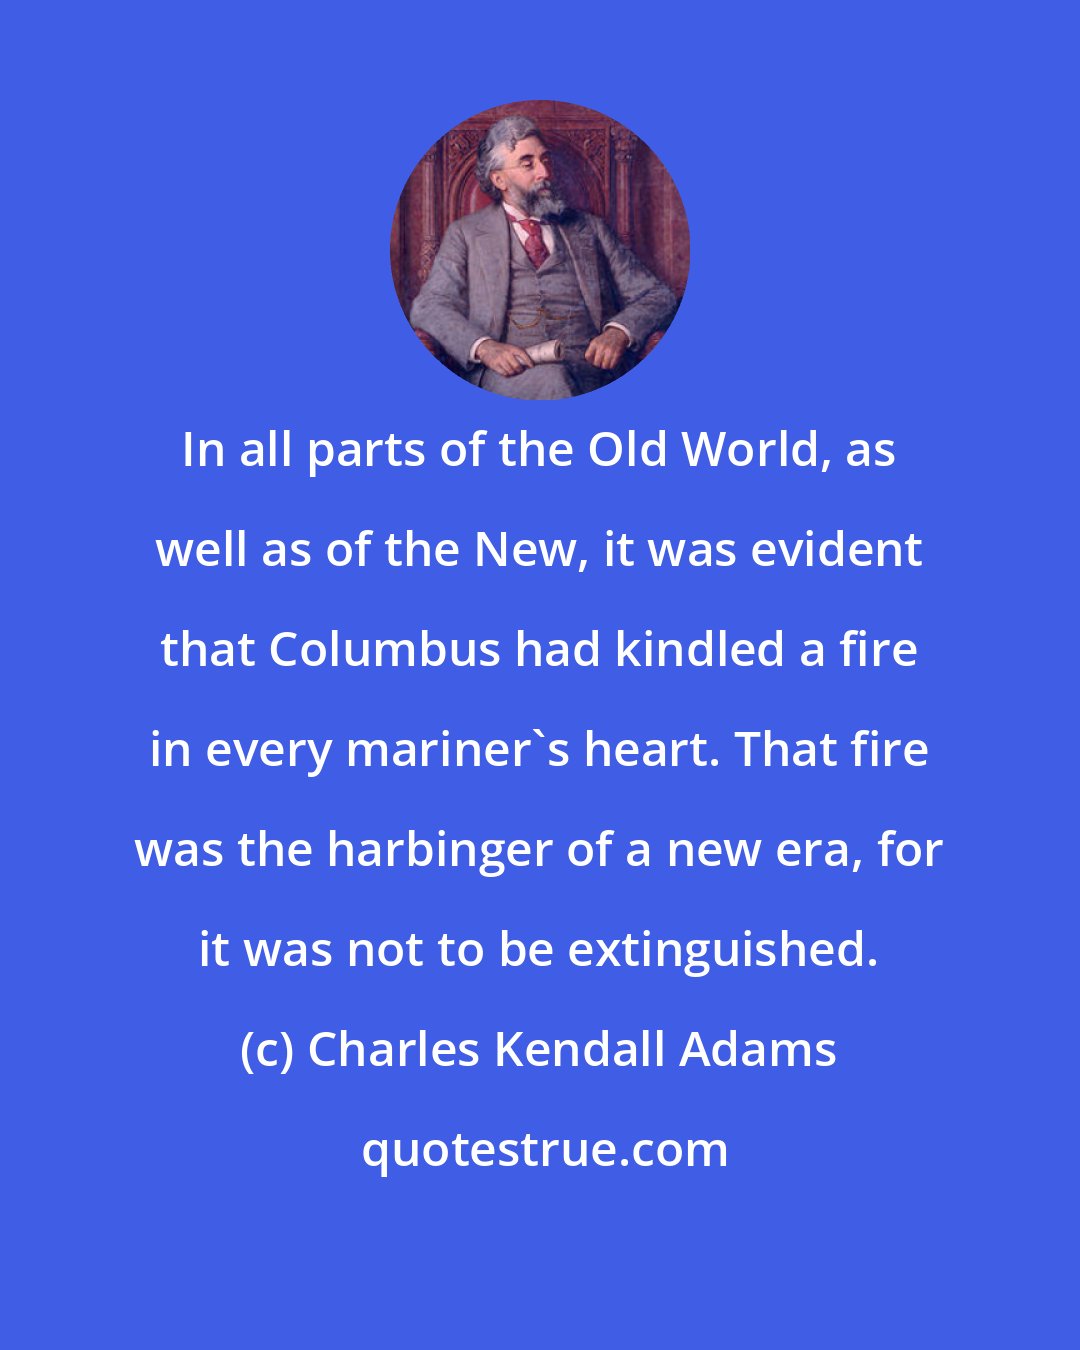 Charles Kendall Adams: In all parts of the Old World, as well as of the New, it was evident that Columbus had kindled a fire in every mariner's heart. That fire was the harbinger of a new era, for it was not to be extinguished.